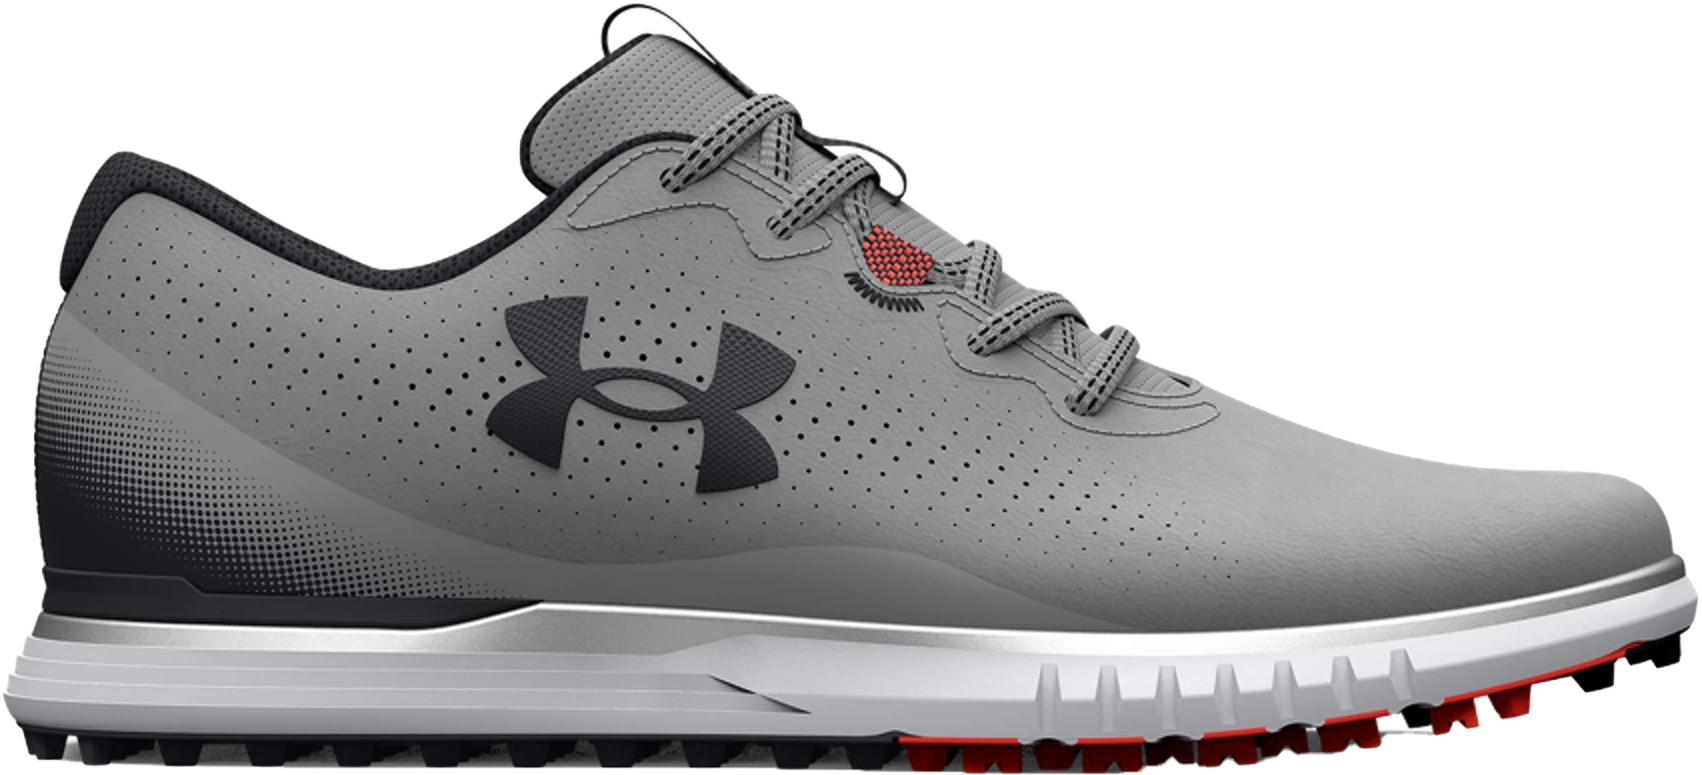 Shoes Under Armour UA Glide 2 SL-GRY